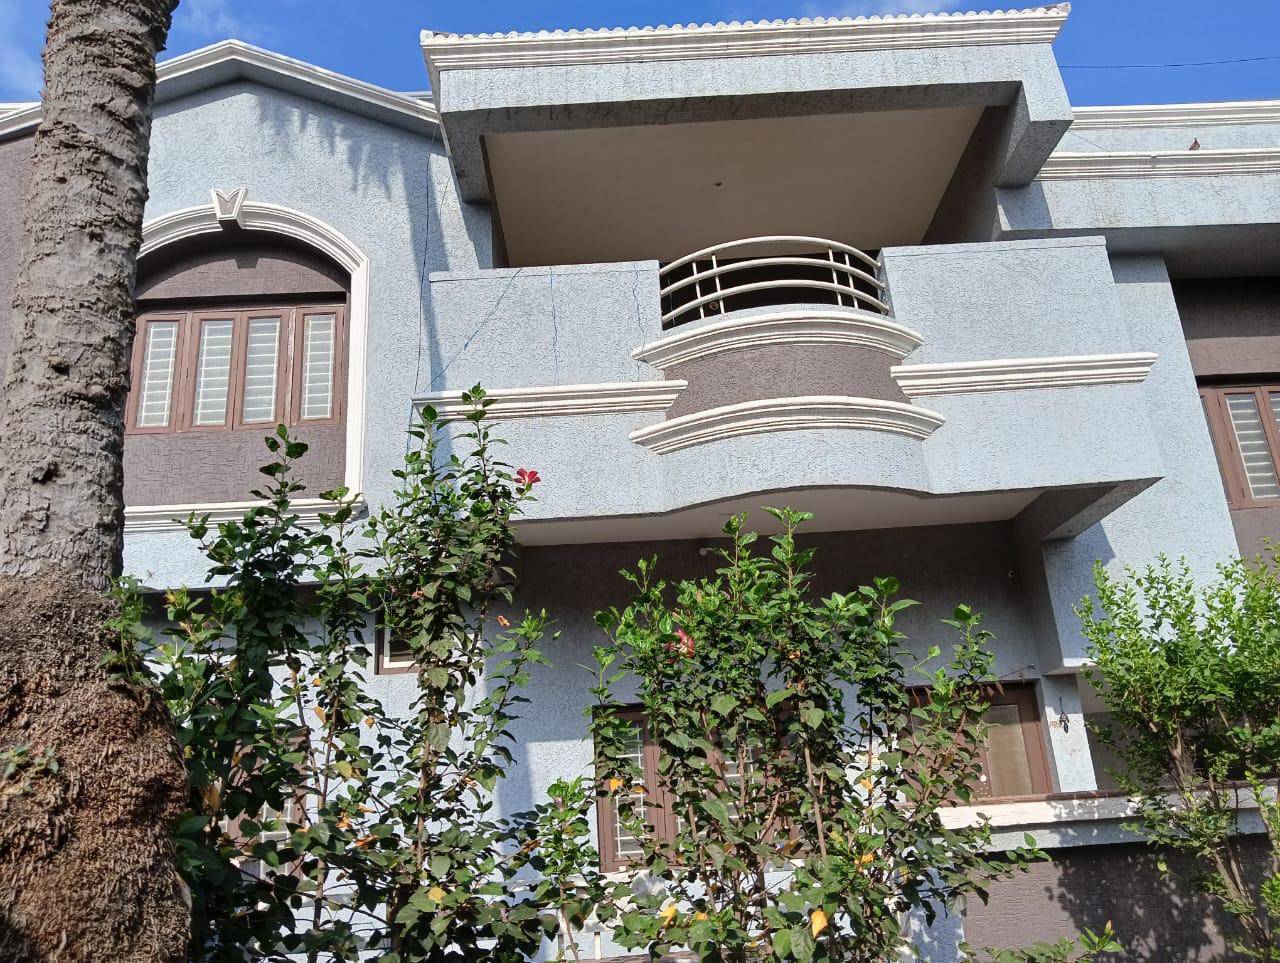 4 Bed/ 4 Bath Rent House/ Bungalow/ Villa; 2,500 sq. ft. carpet area, UnFurnished for rent @Awadhpuri 